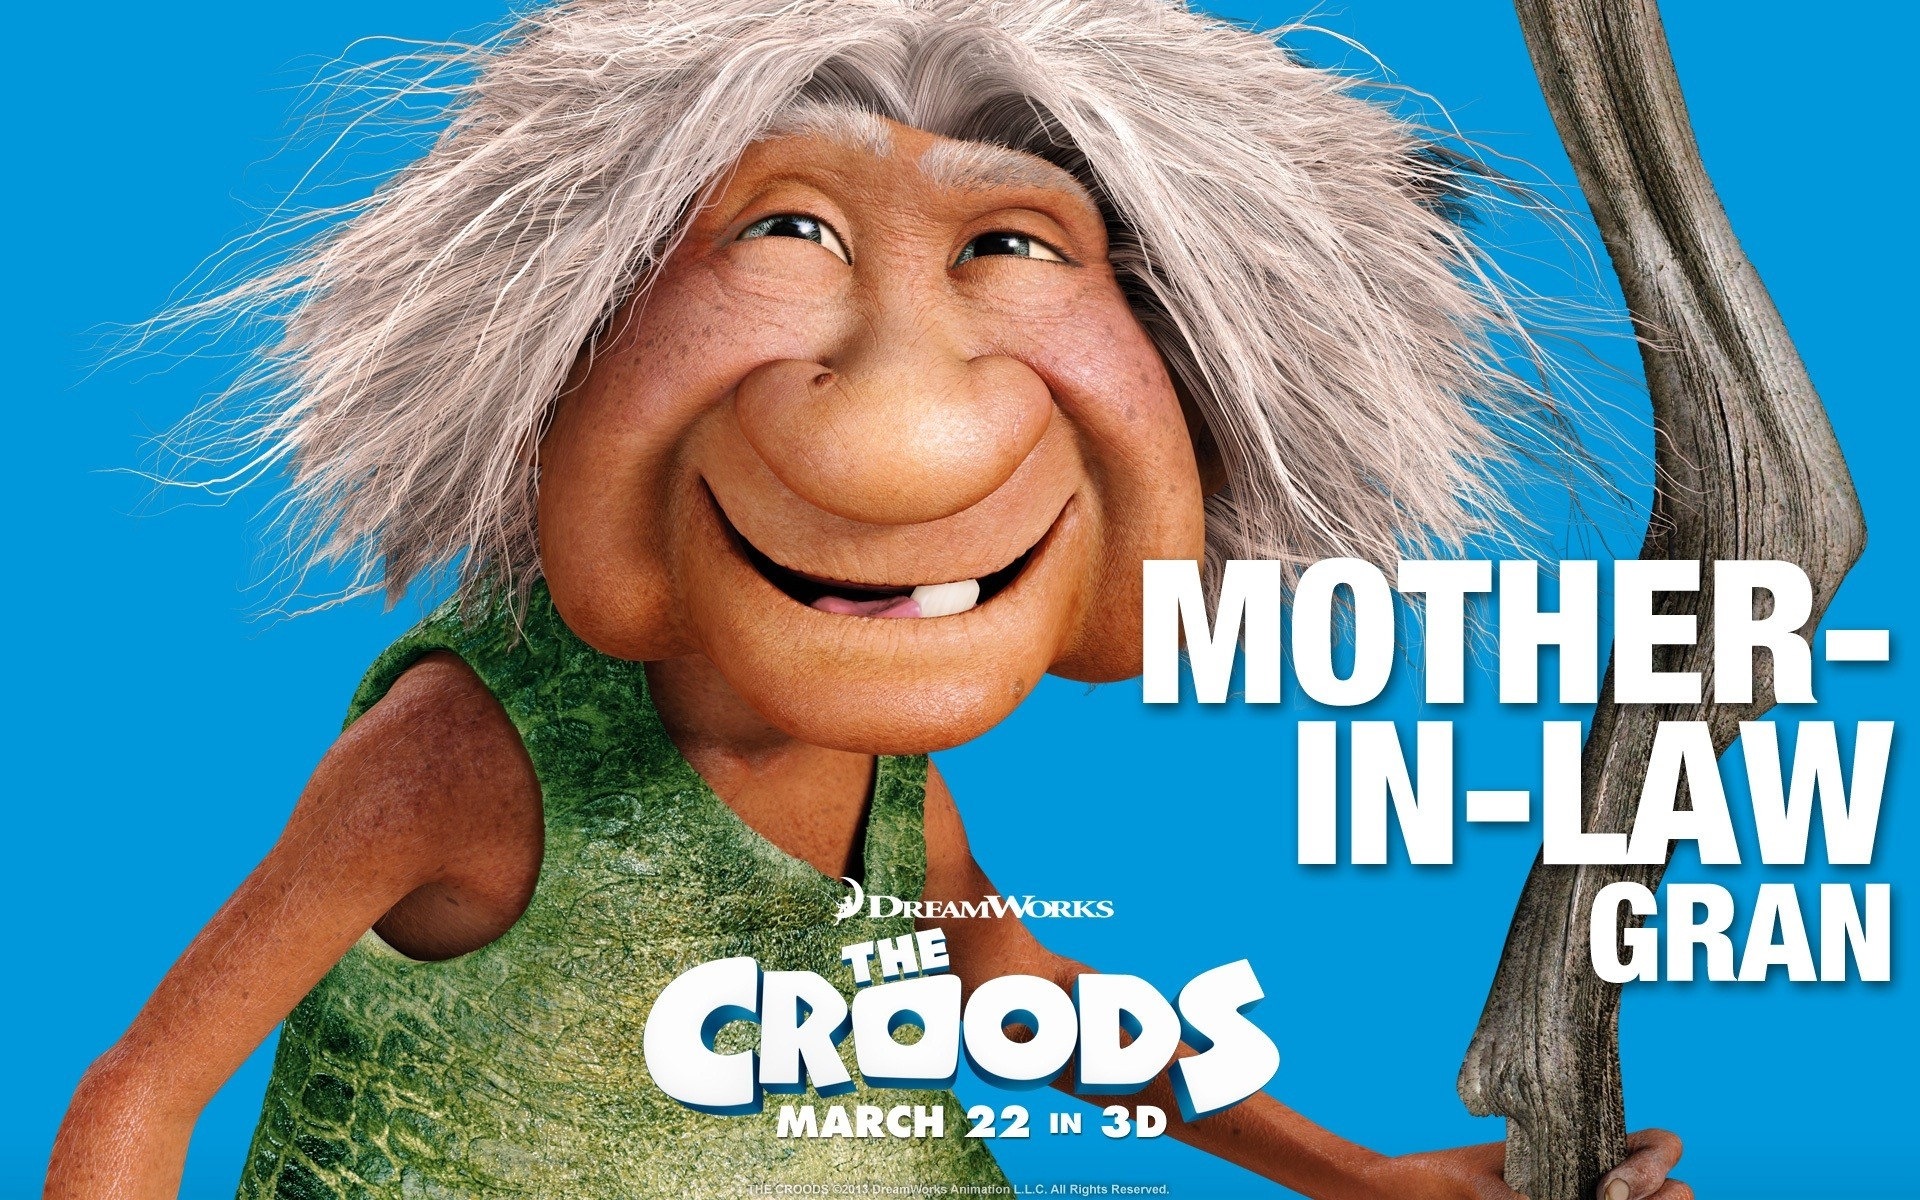 V Croods HD Movie Wallpapers #6 - 1920x1200